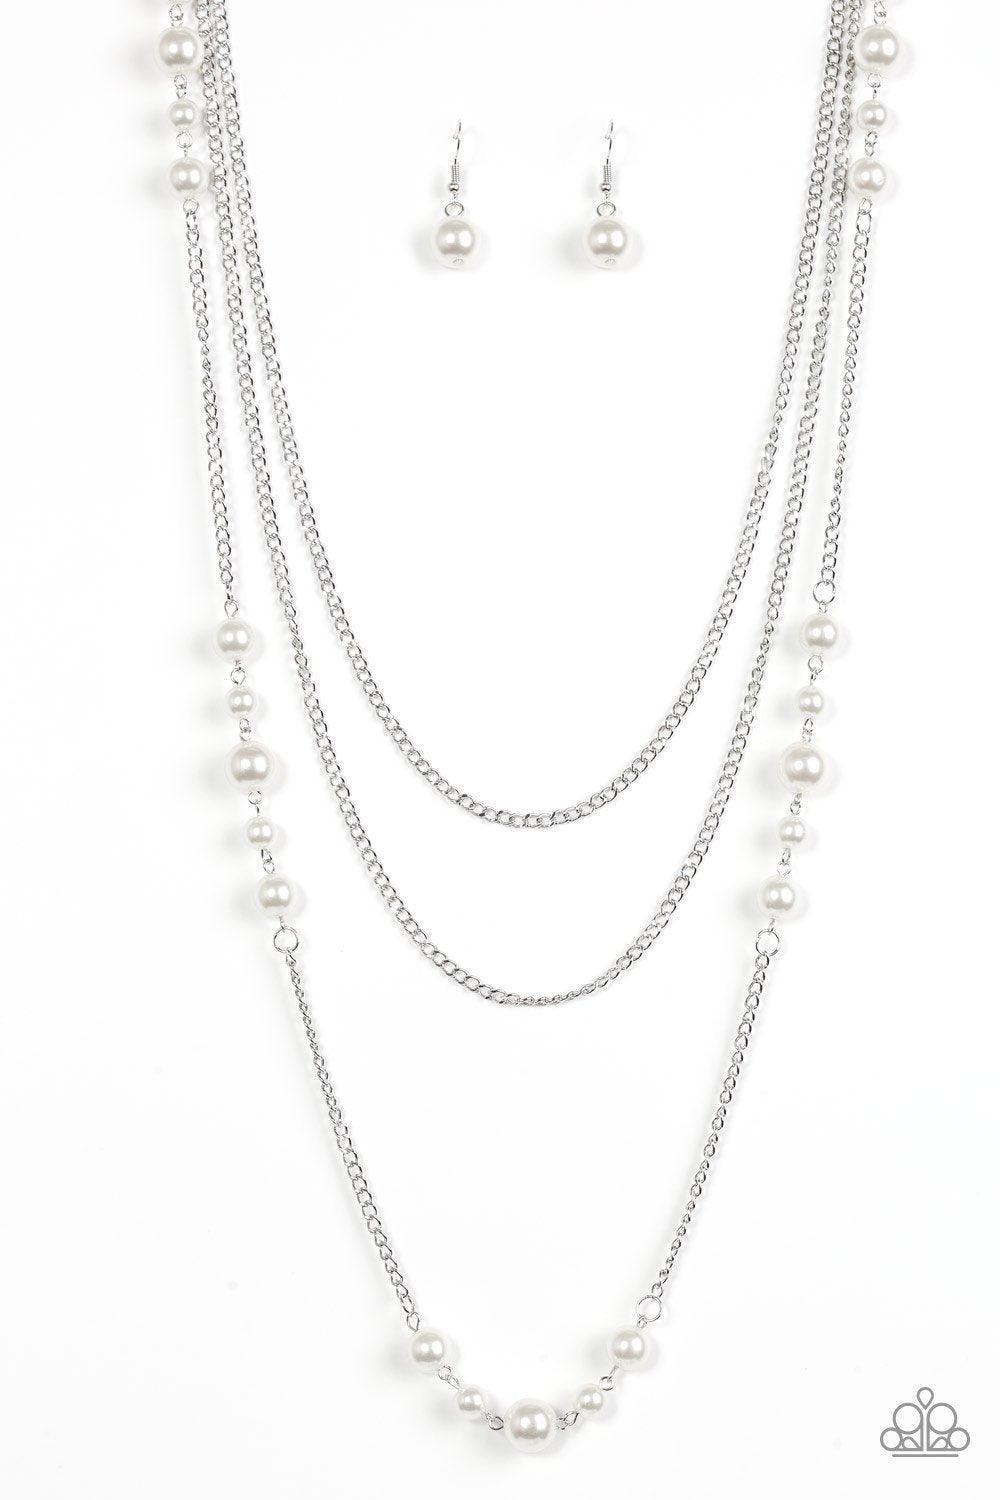 Diva Dilemma Silver and White Pearl Necklace - Paparazzi Accessories-CarasShop.com - $5 Jewelry by Cara Jewels